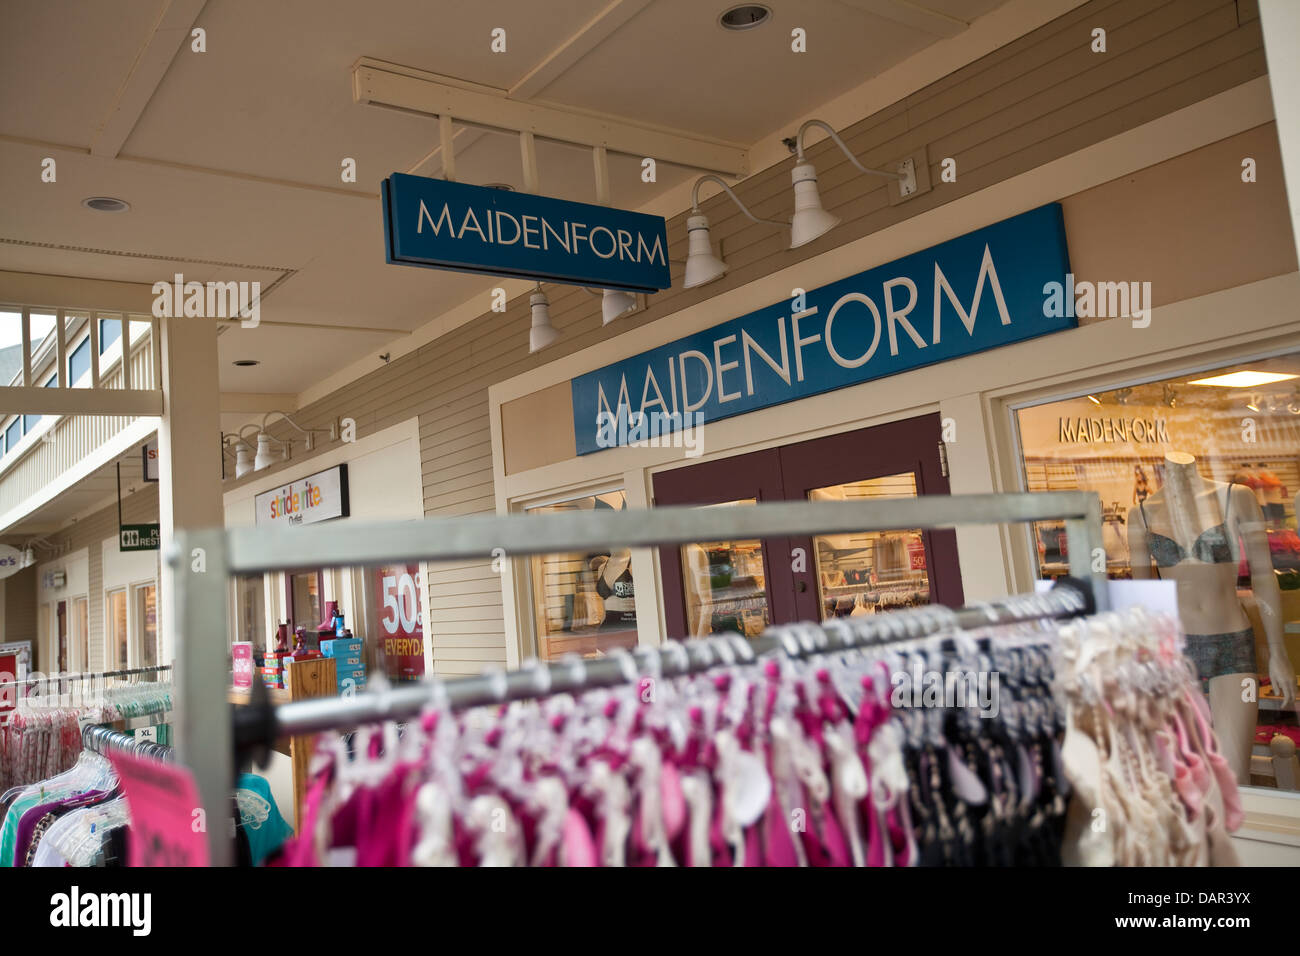 https://c8.alamy.com/comp/DAR3YX/a-maidenform-store-is-pictured-at-the-settlers-green-outlet-village-DAR3YX.jpg